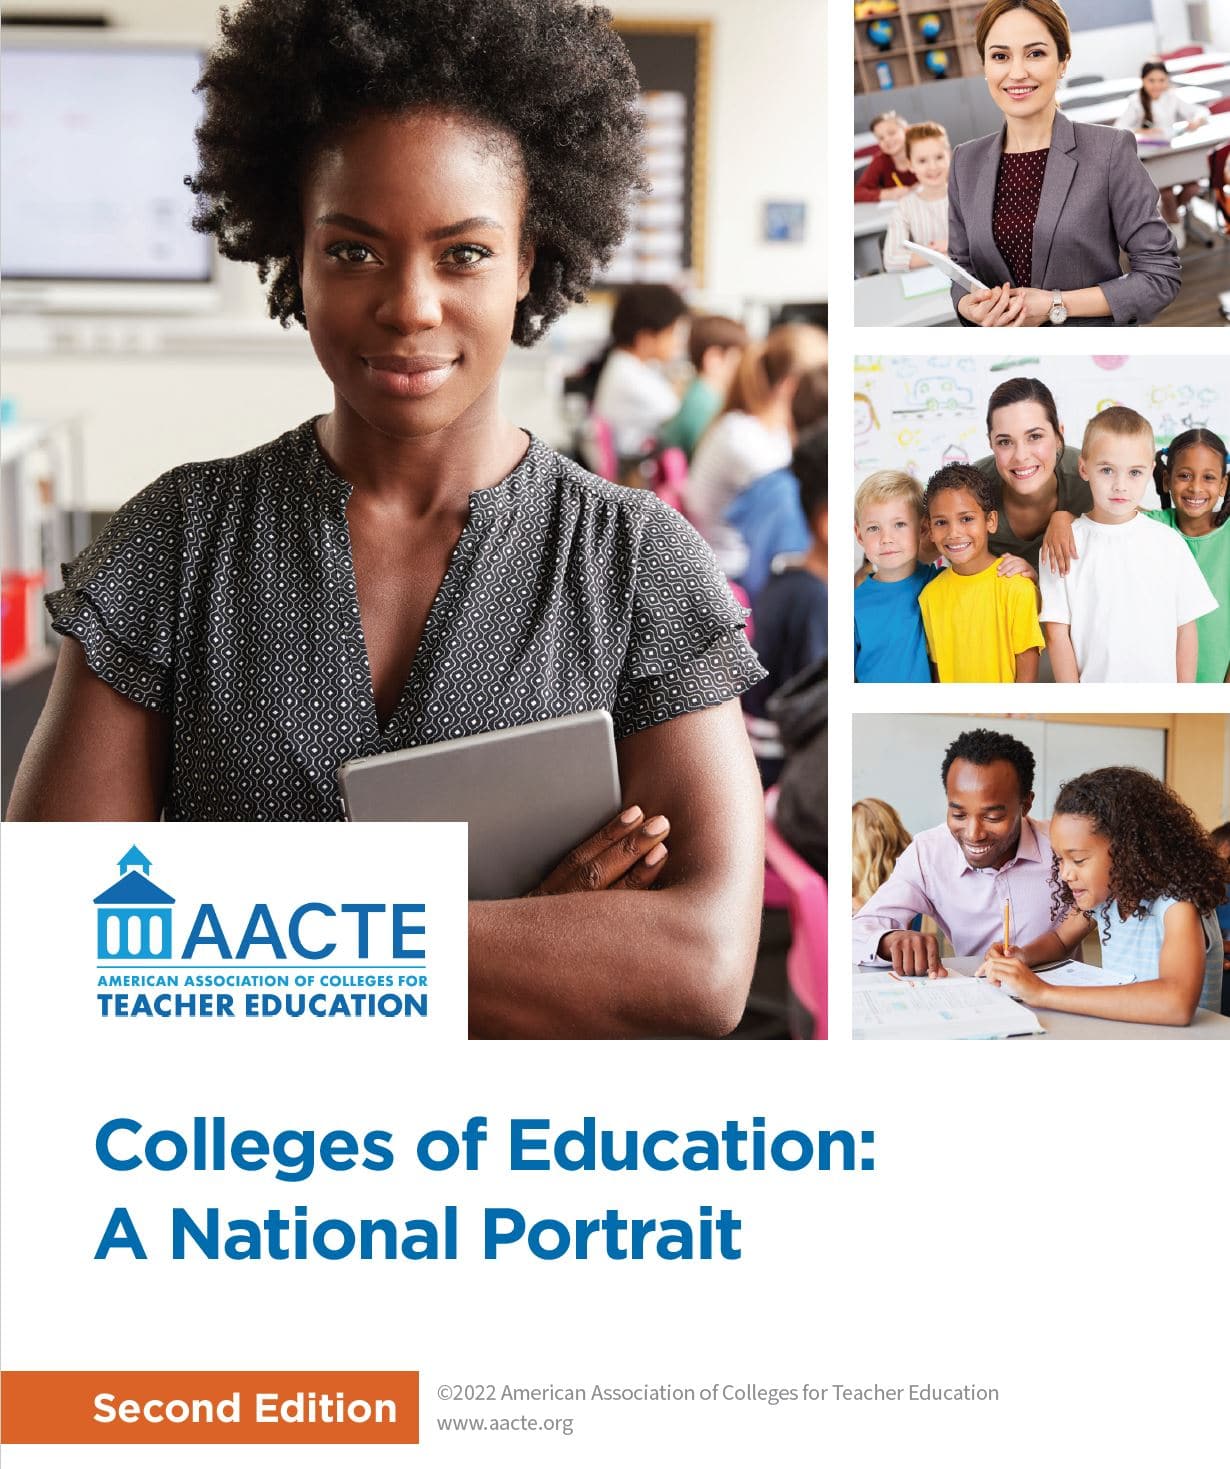 Colleges of Education: A National Portrait - Second Edition